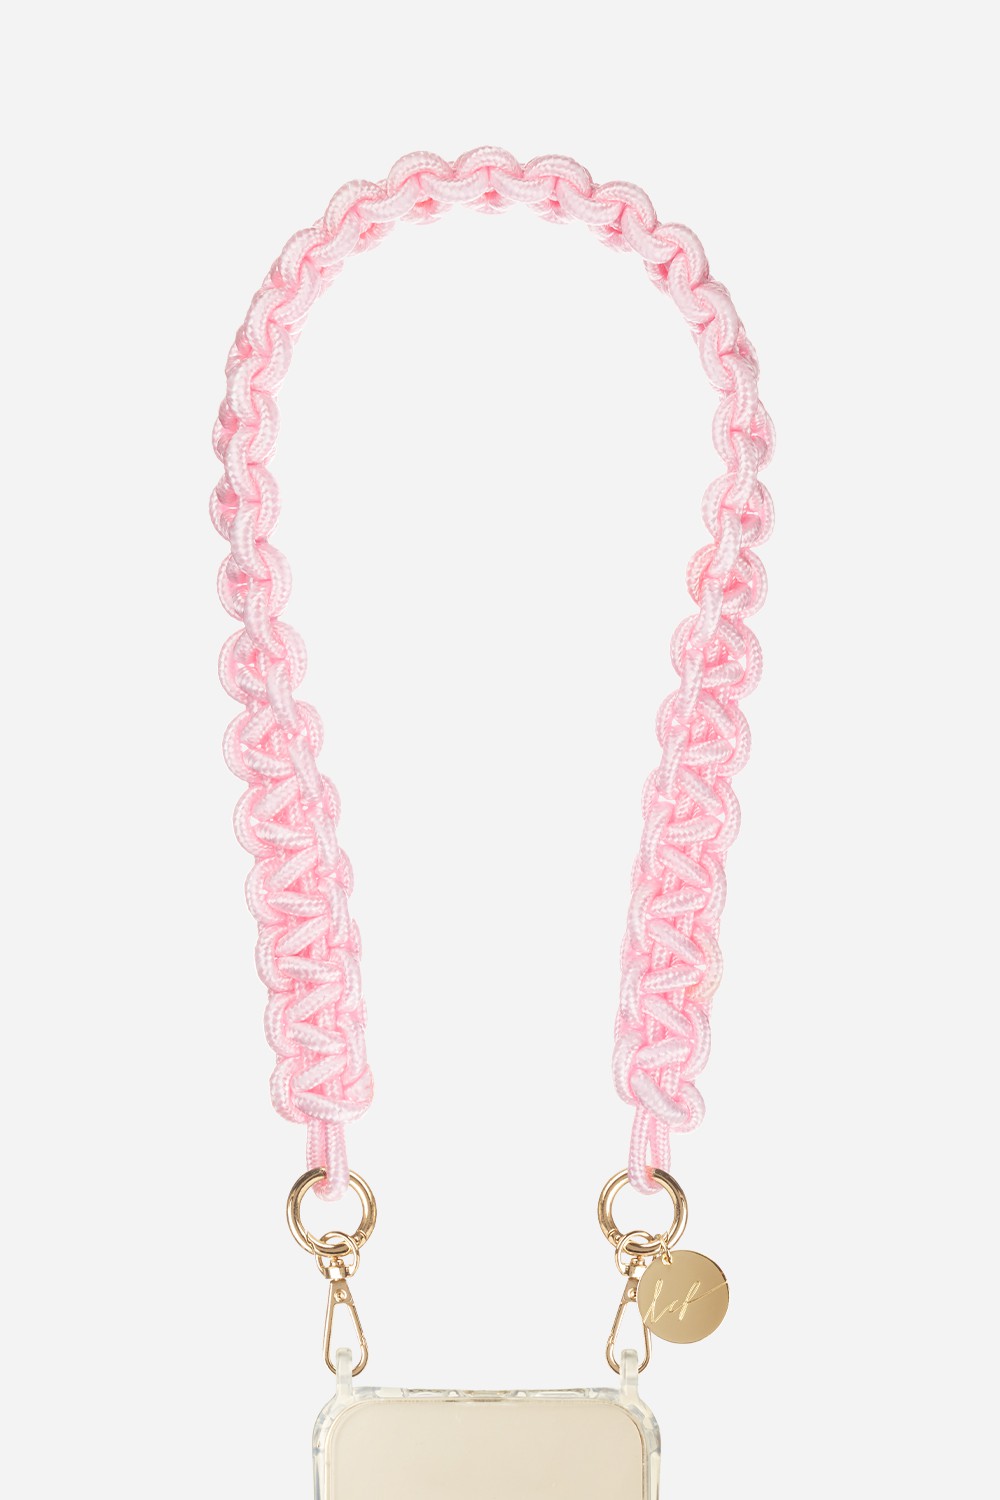 Short Robby Chain Pink 60 cm